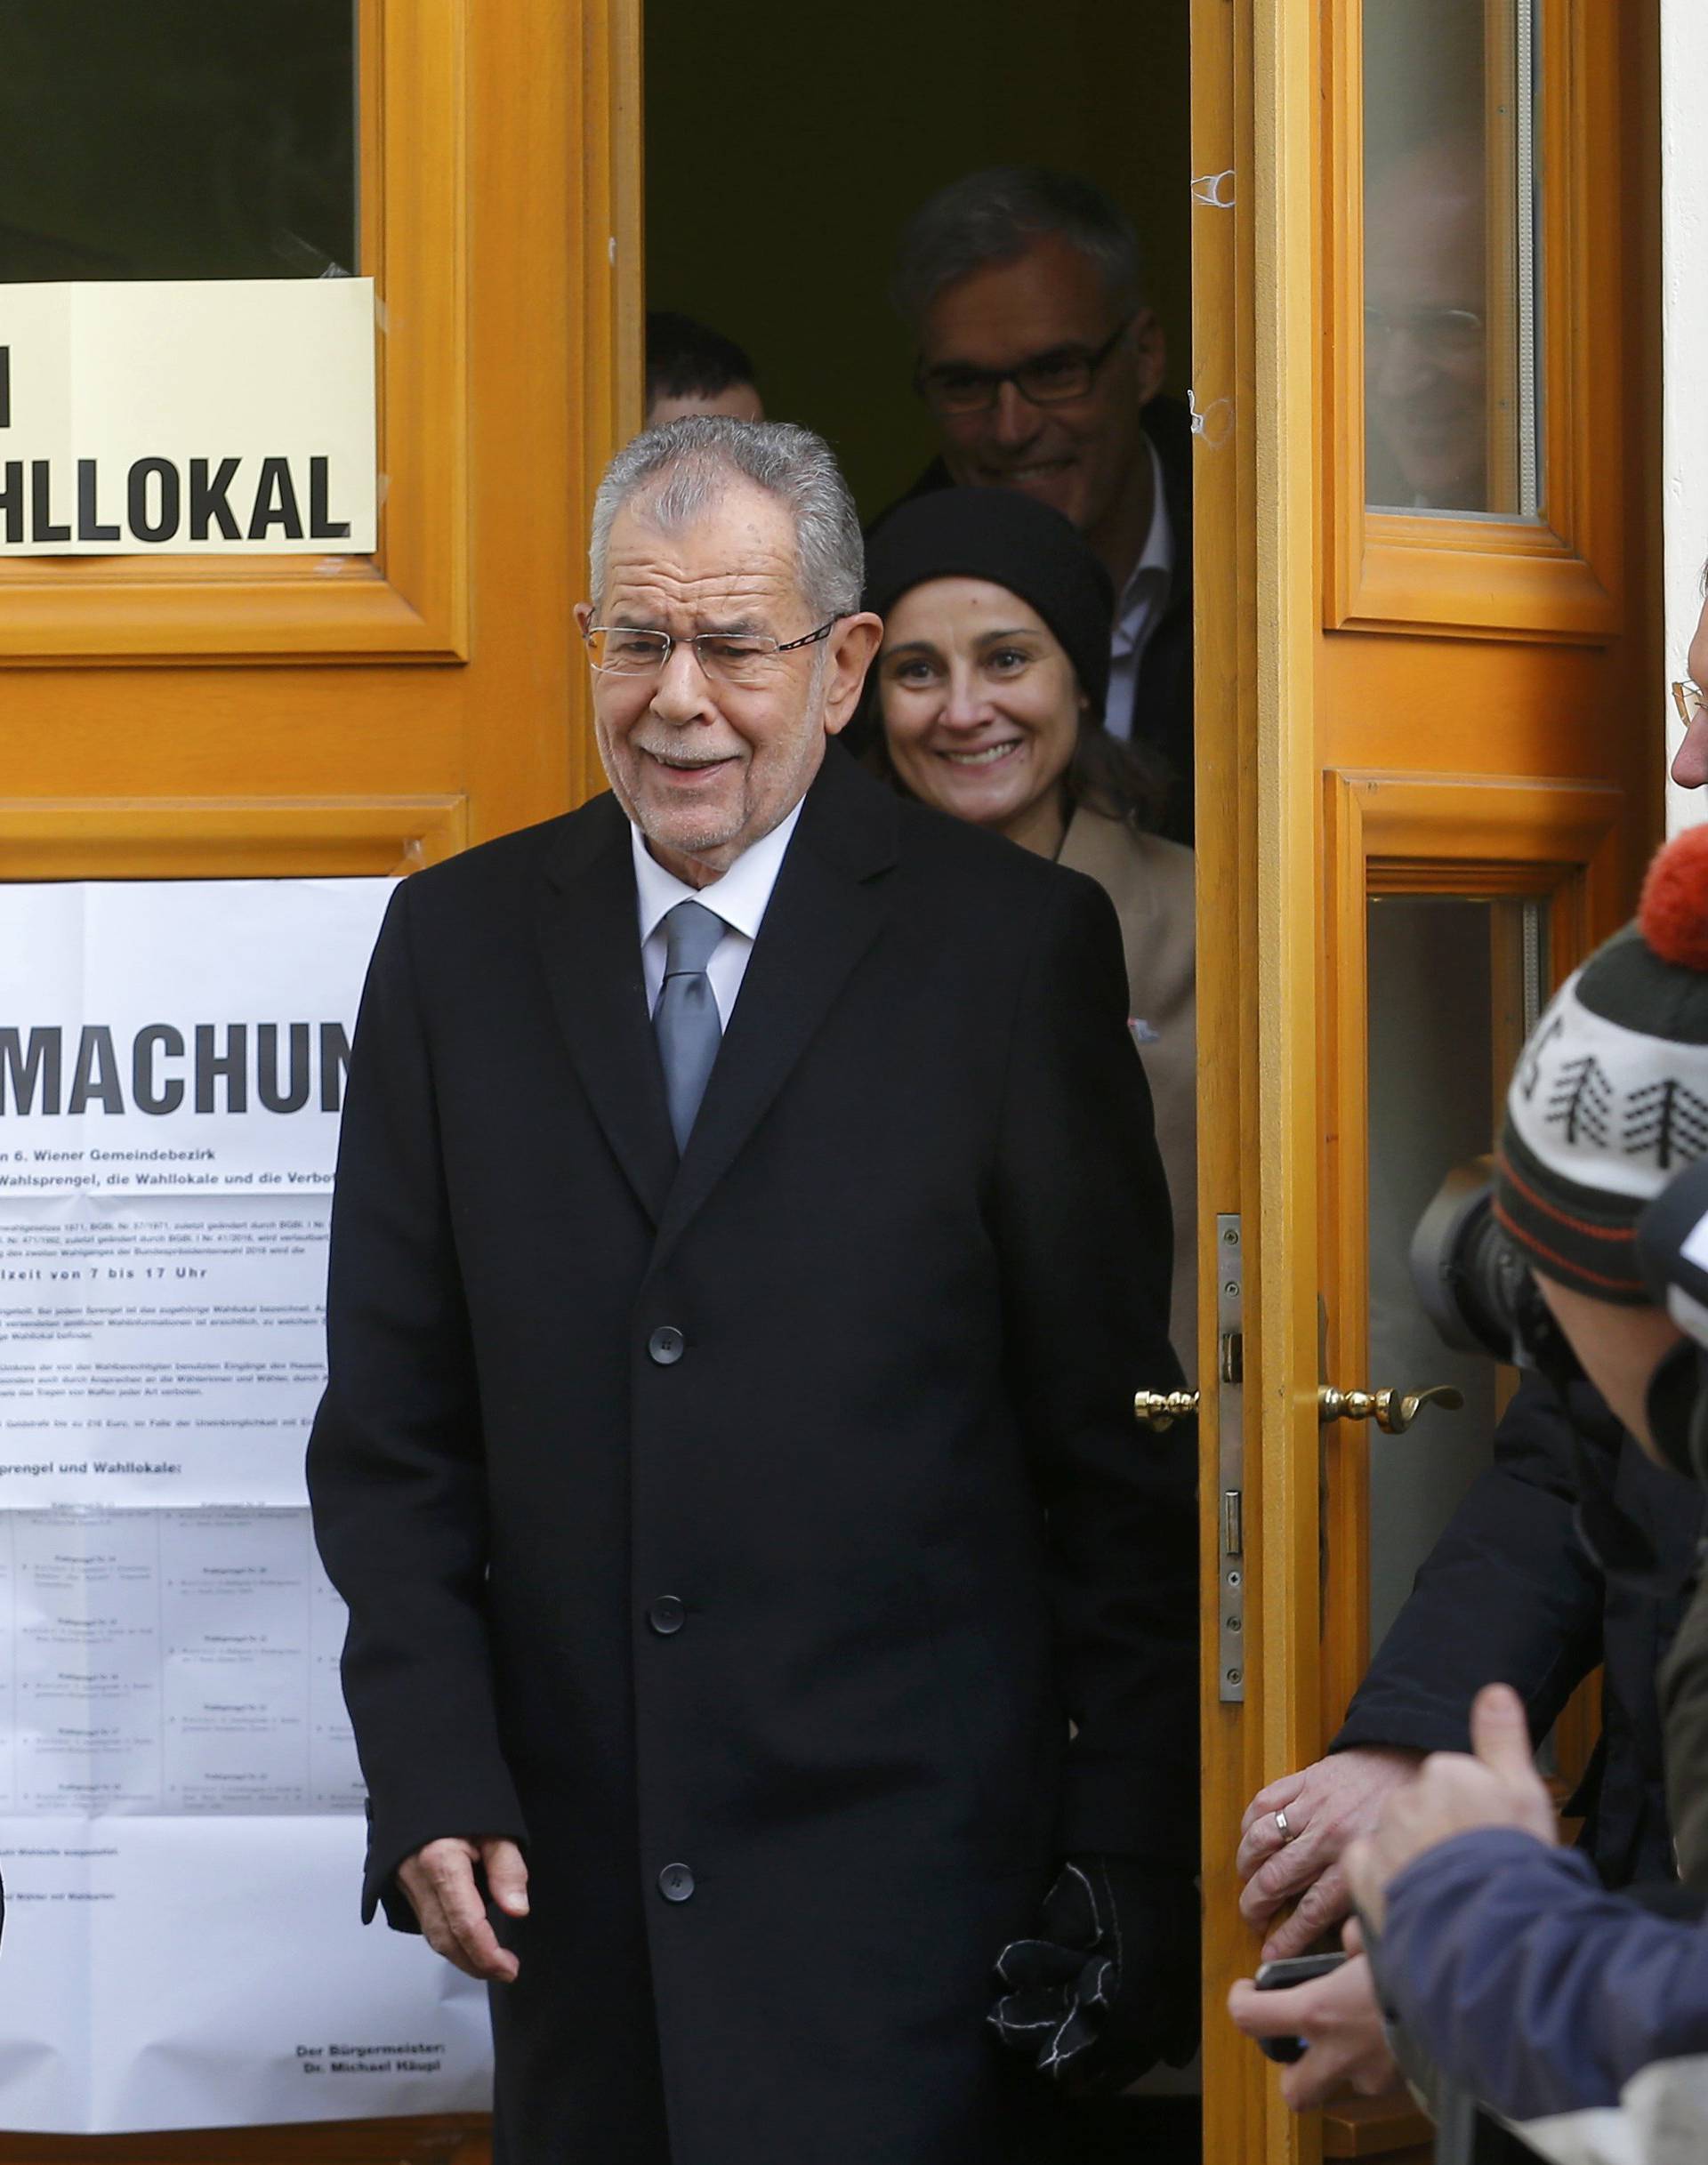 Austrian presidential candidate Van der Bellen, who is supported by the Greens, and his wife Schmidauer leave polling station in Vienna